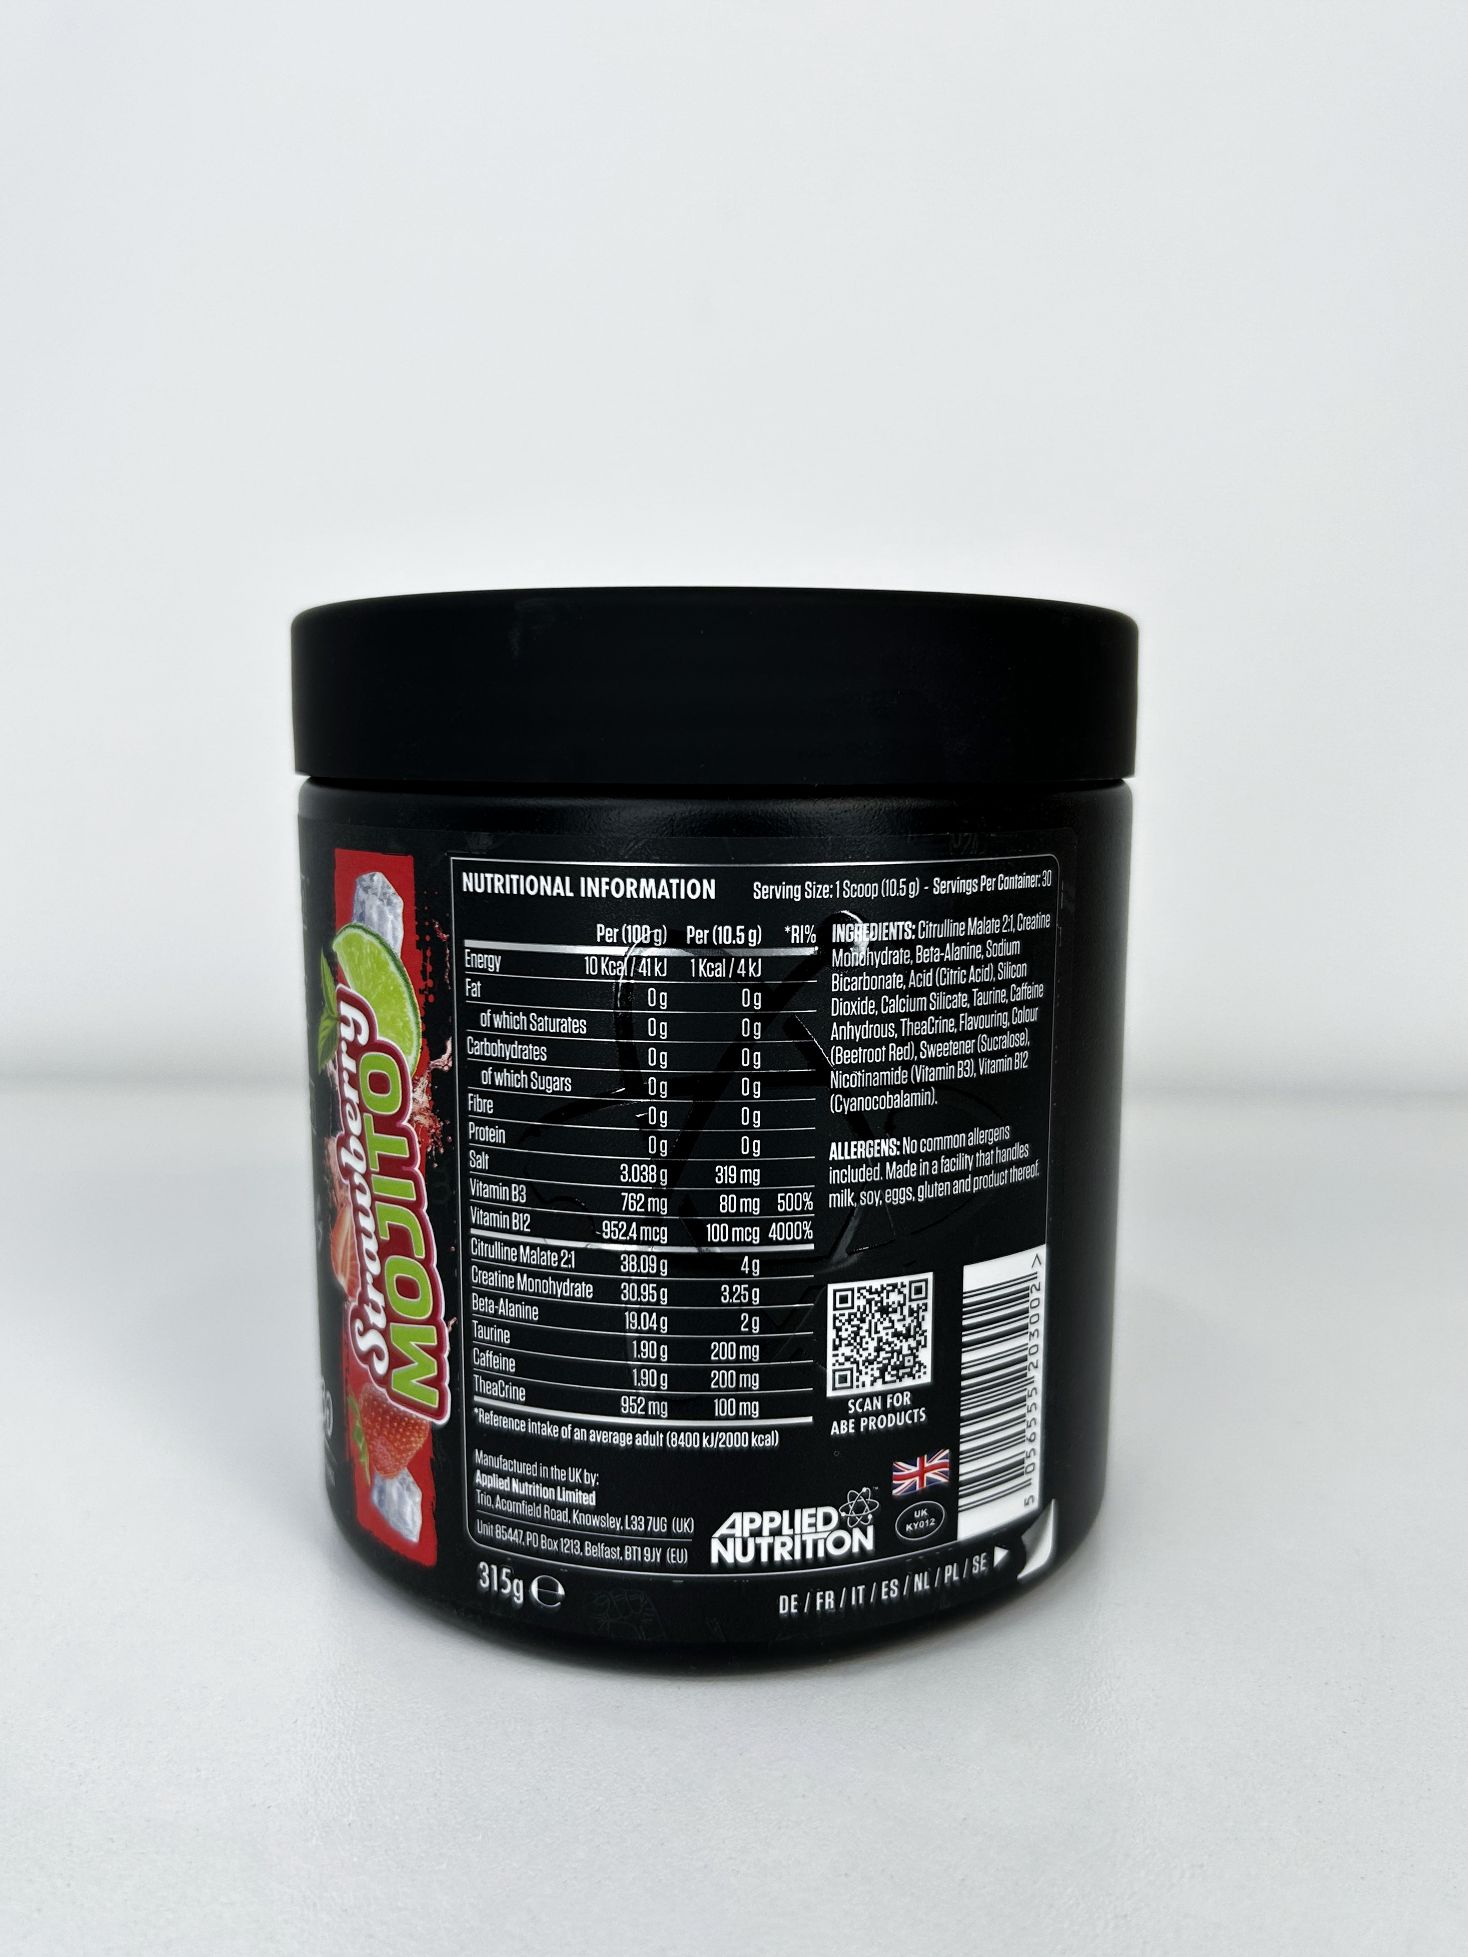 APPLIED NUTRITION ABE - ALL BLACK EVERYTHING PRE-WORKOUT